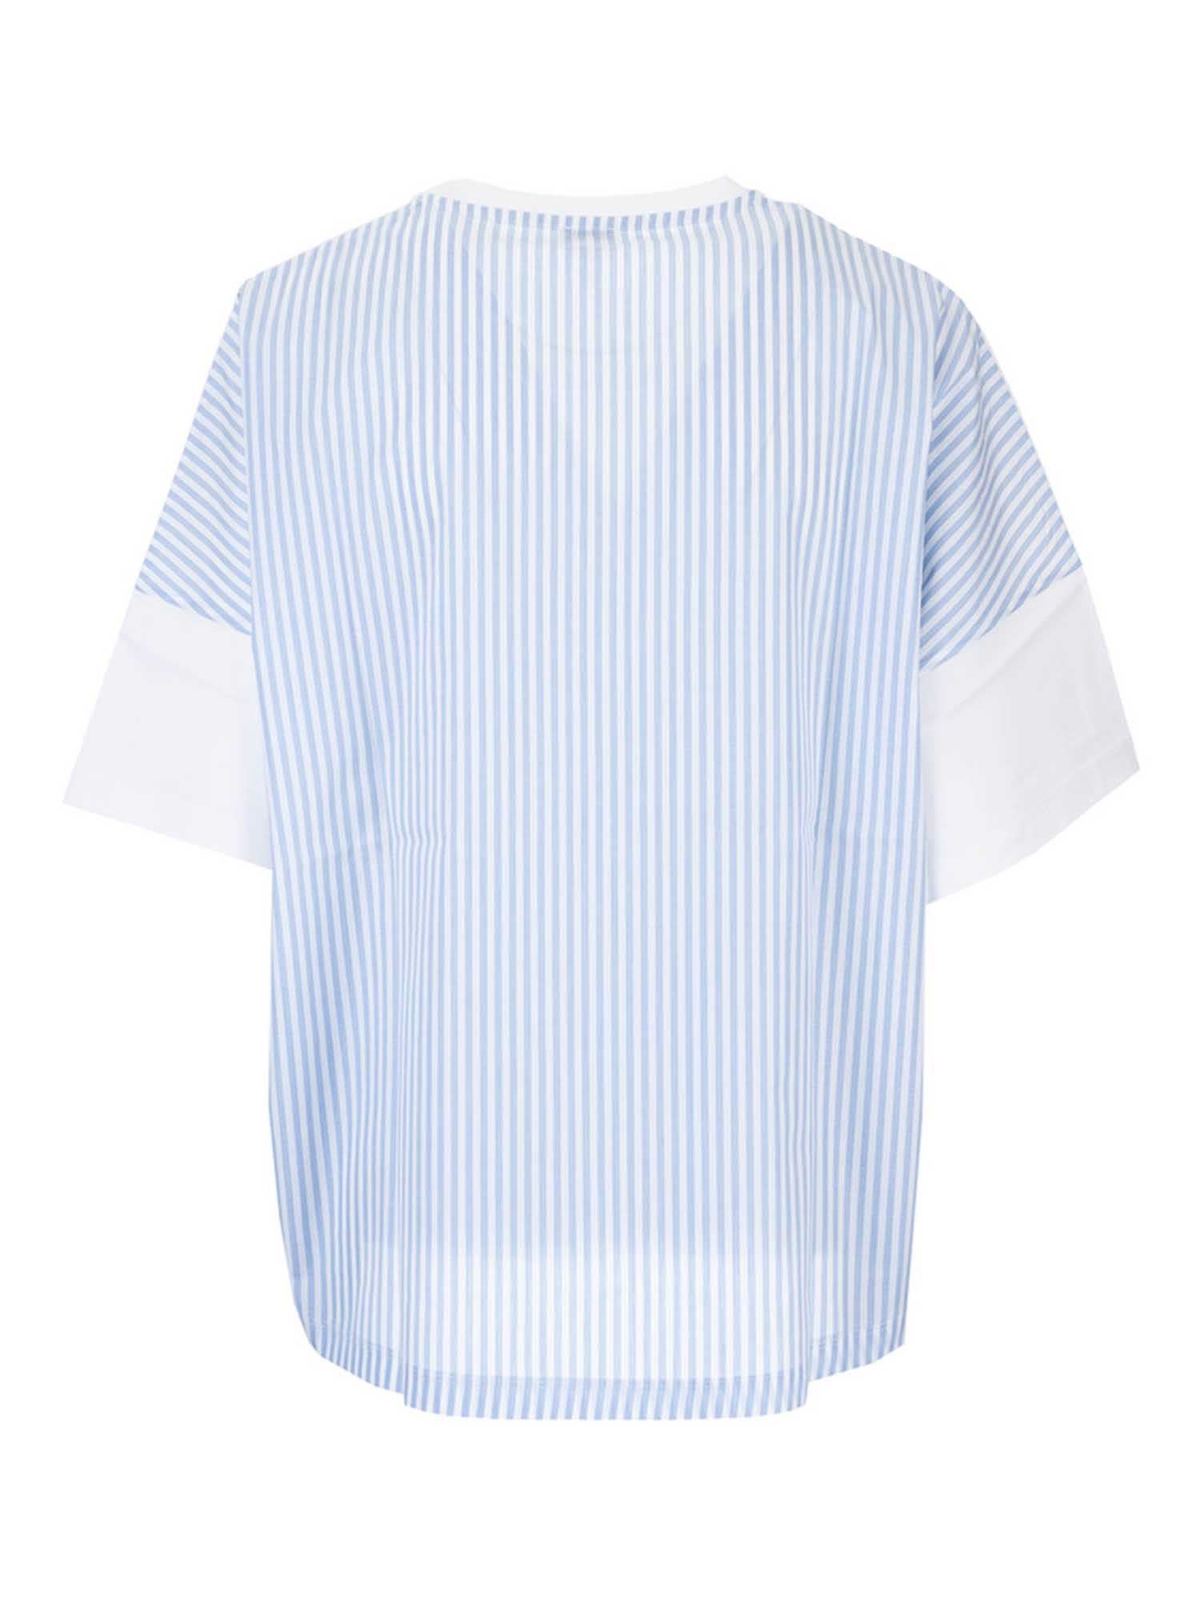 T-shirts Loewe - T-shirt with white and blue striped back - S359333XAT2100